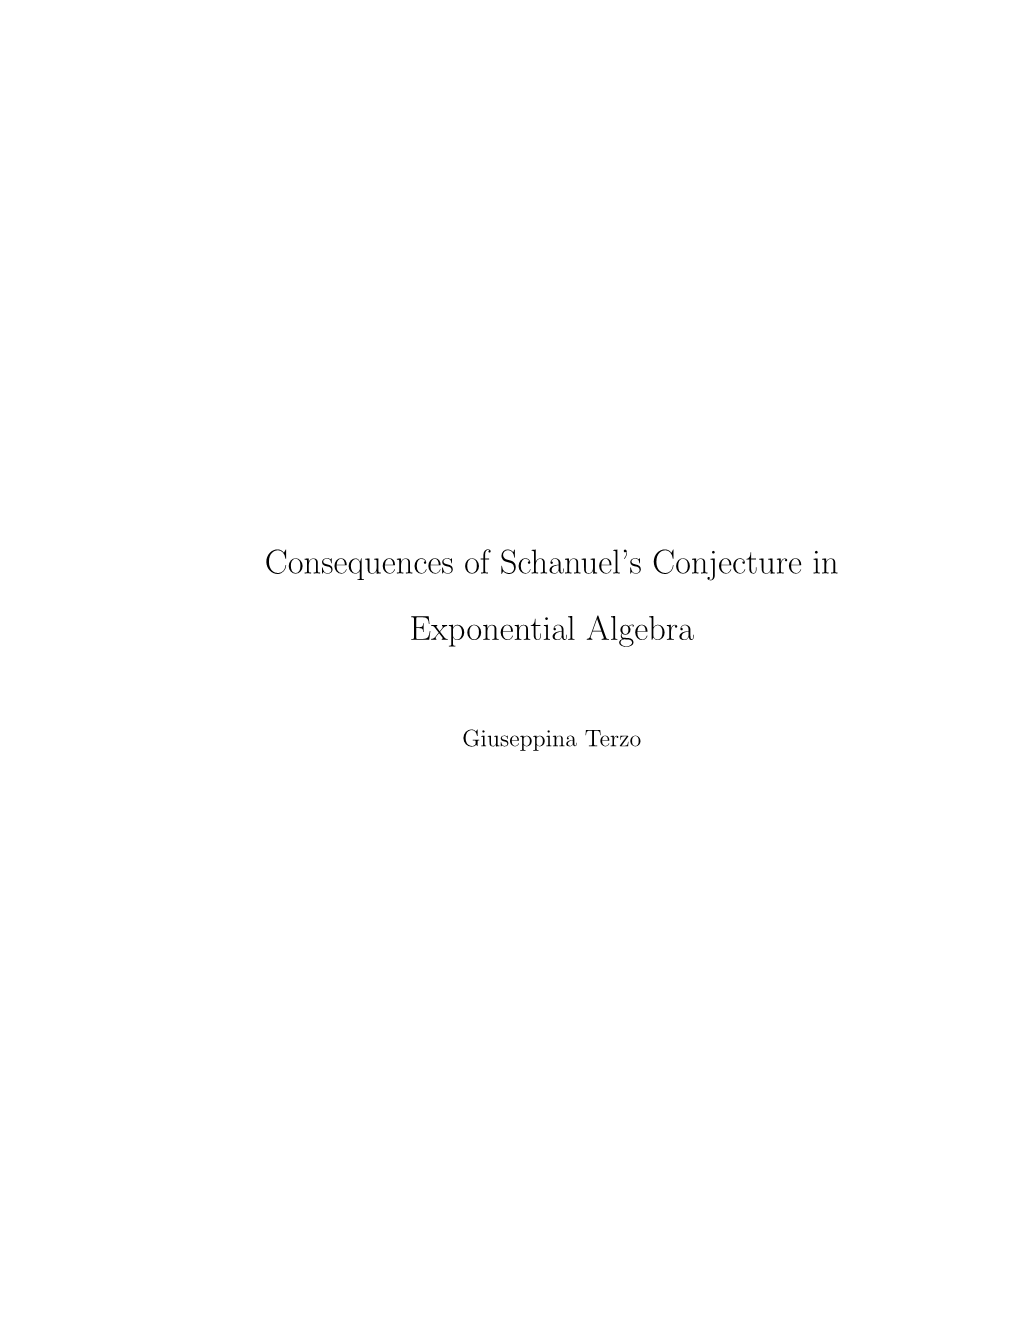 Consequences of Schanuel's Conjecture in Exponential Algebra